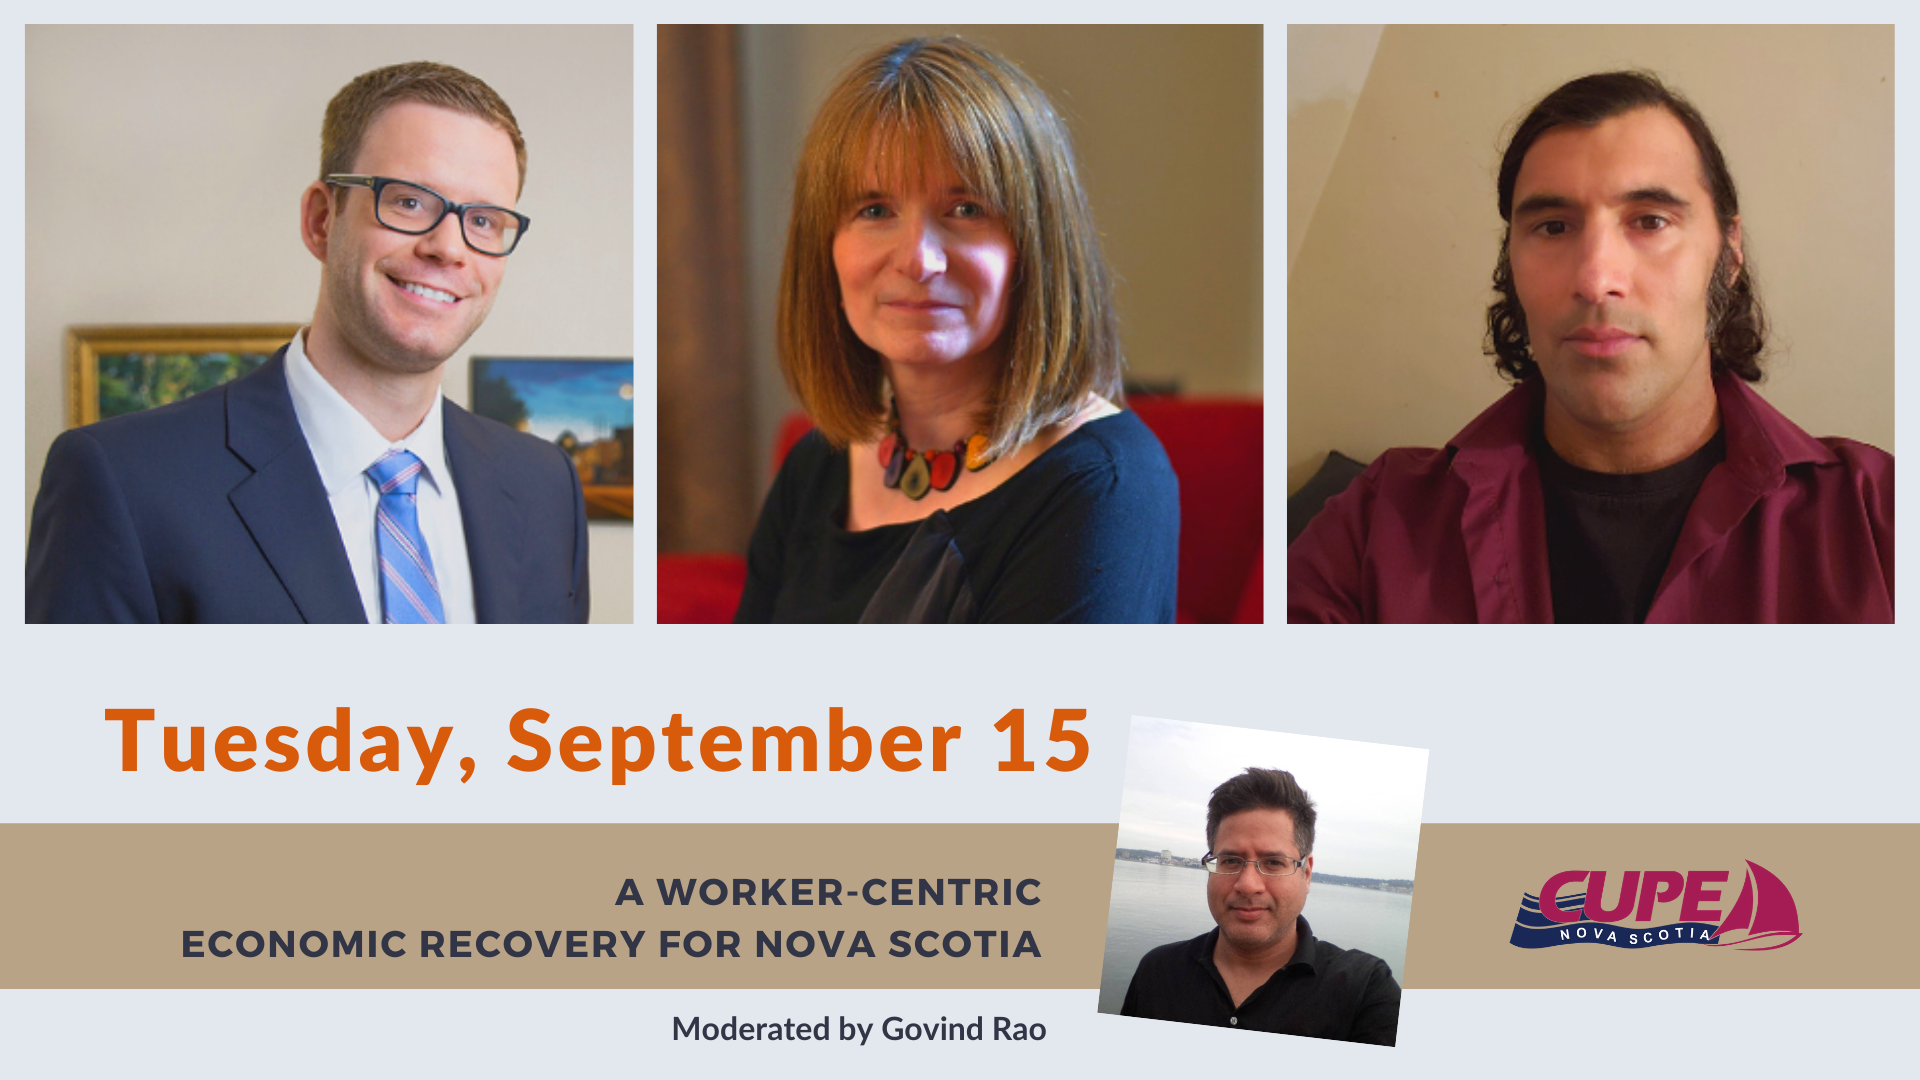 web banner - Webinar: A Worker-Centric Economic Recovery for Nova Scotia. Photos of three panelists and the moderator. Date: Tuesday, September 15